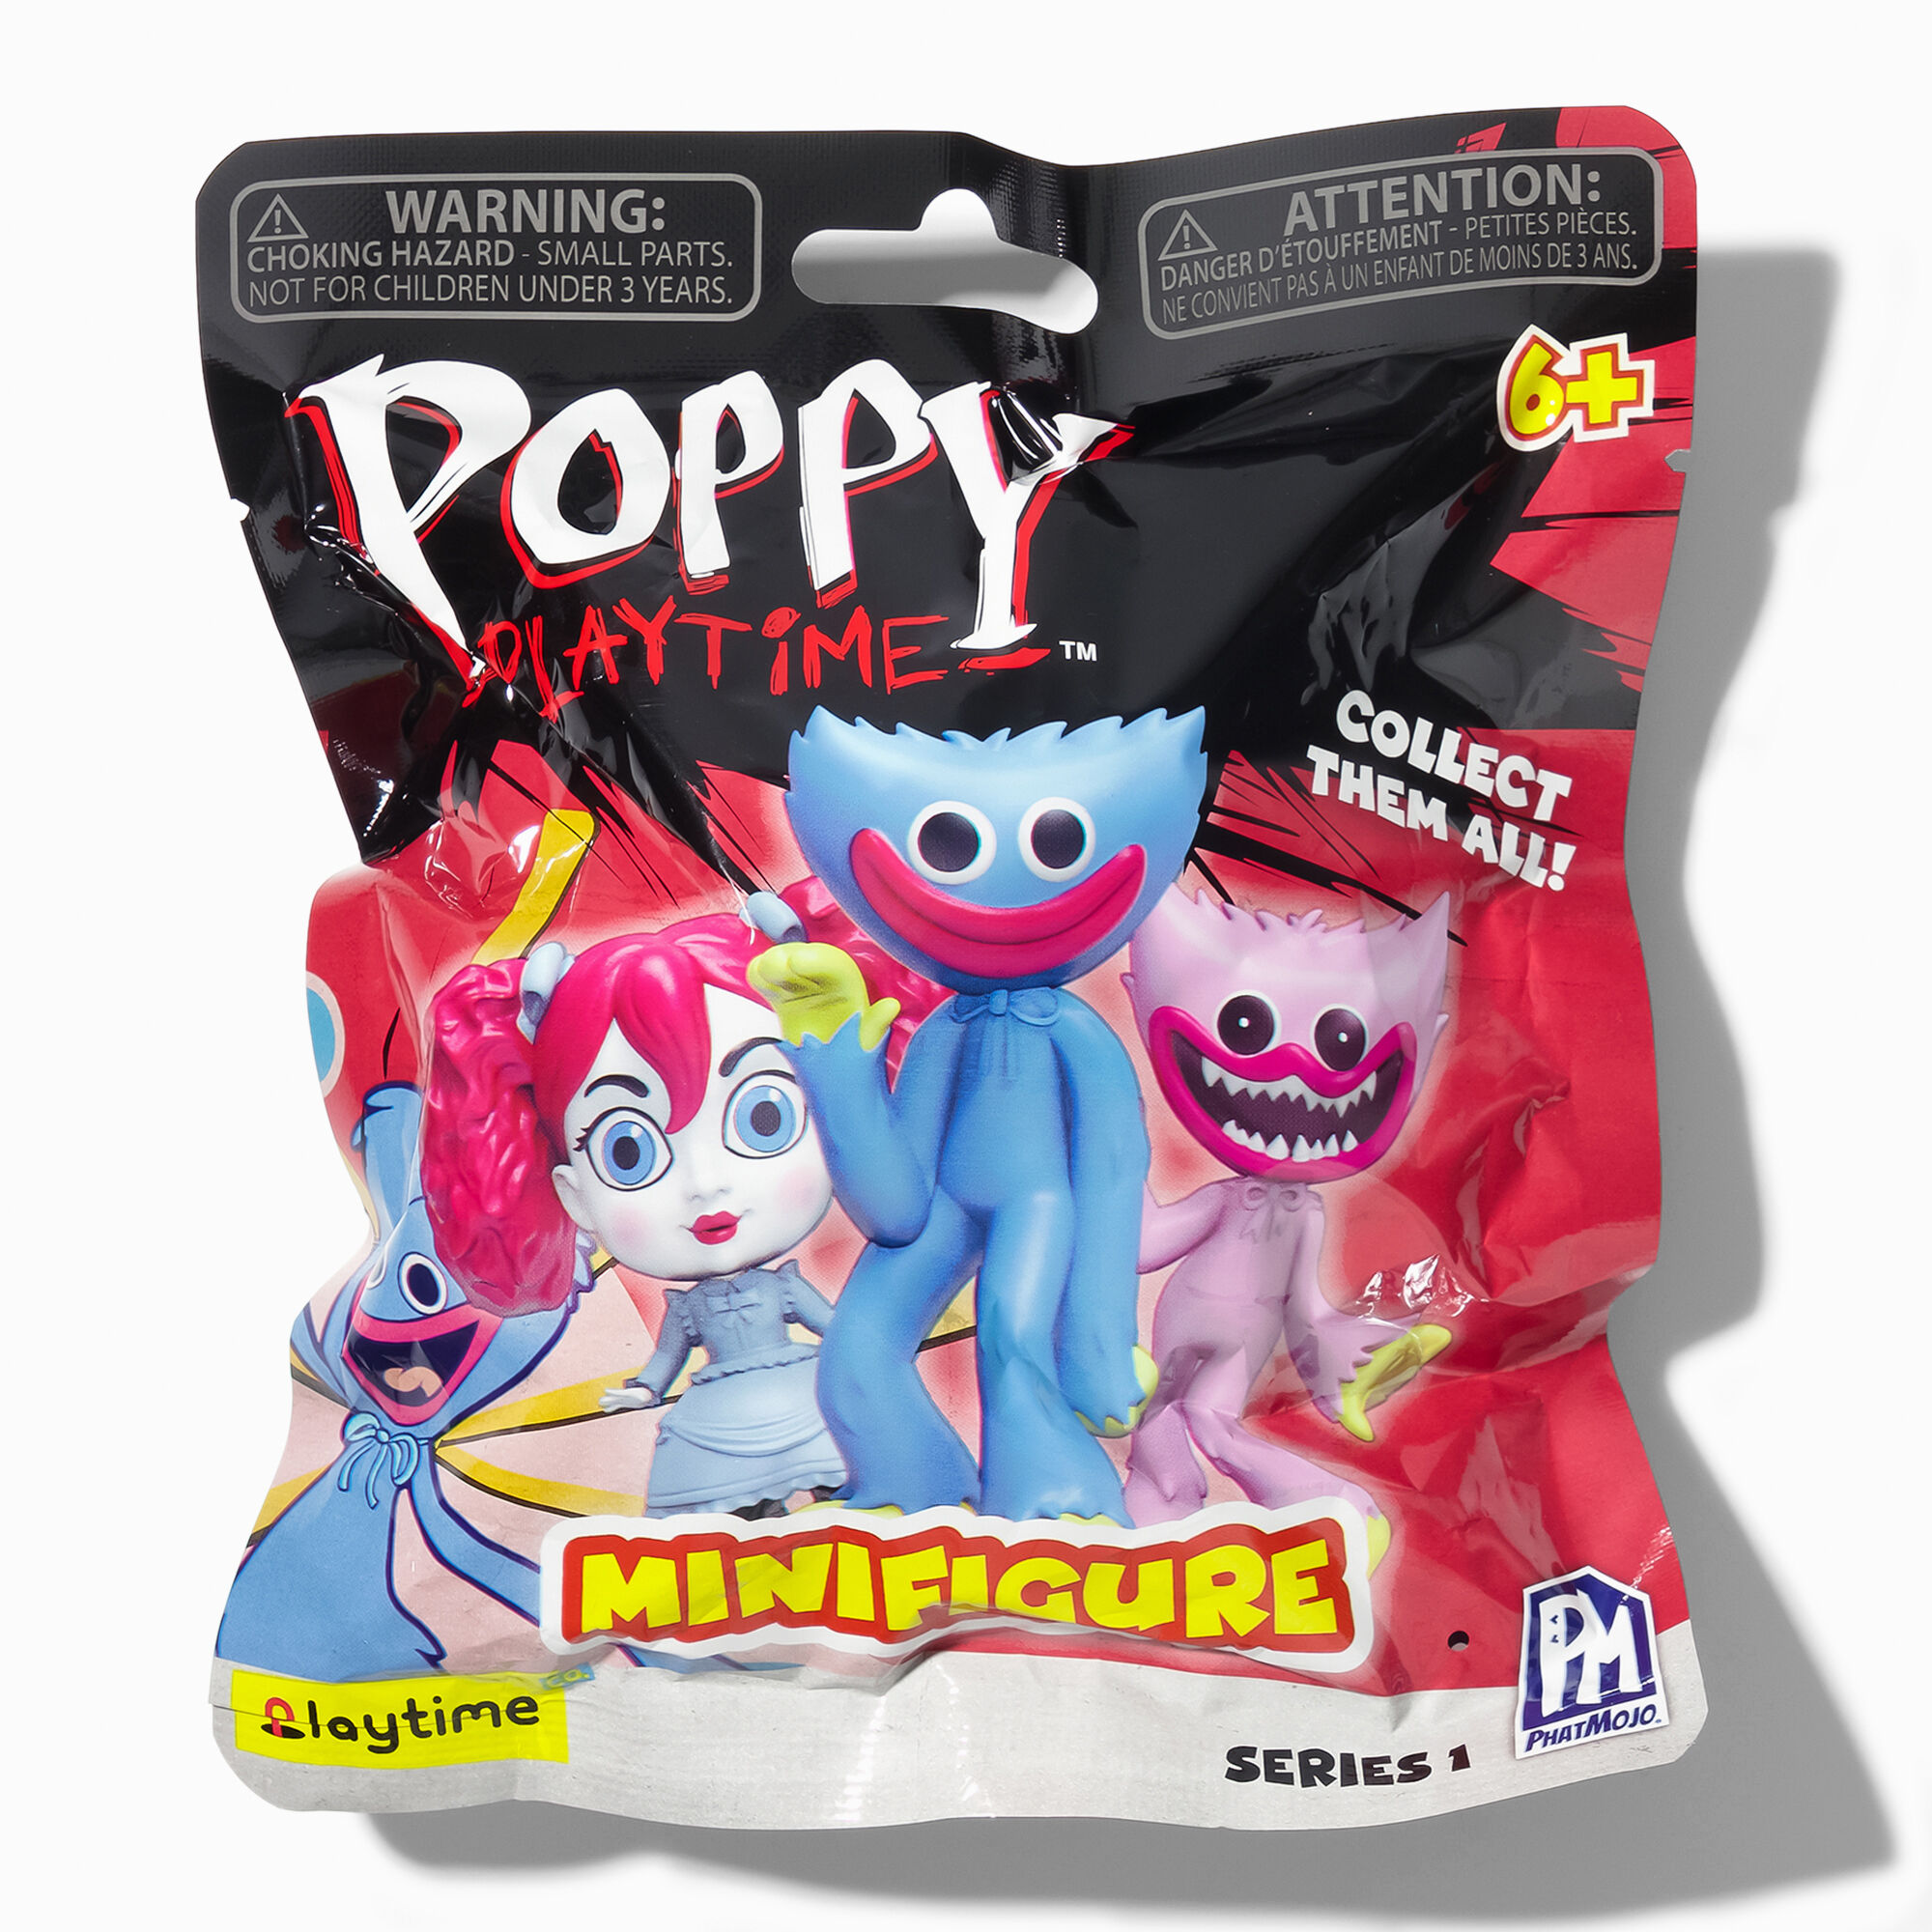 View Claires Poppy Playtime Series 1 Mini Figure Blind Bag Styles Vary information